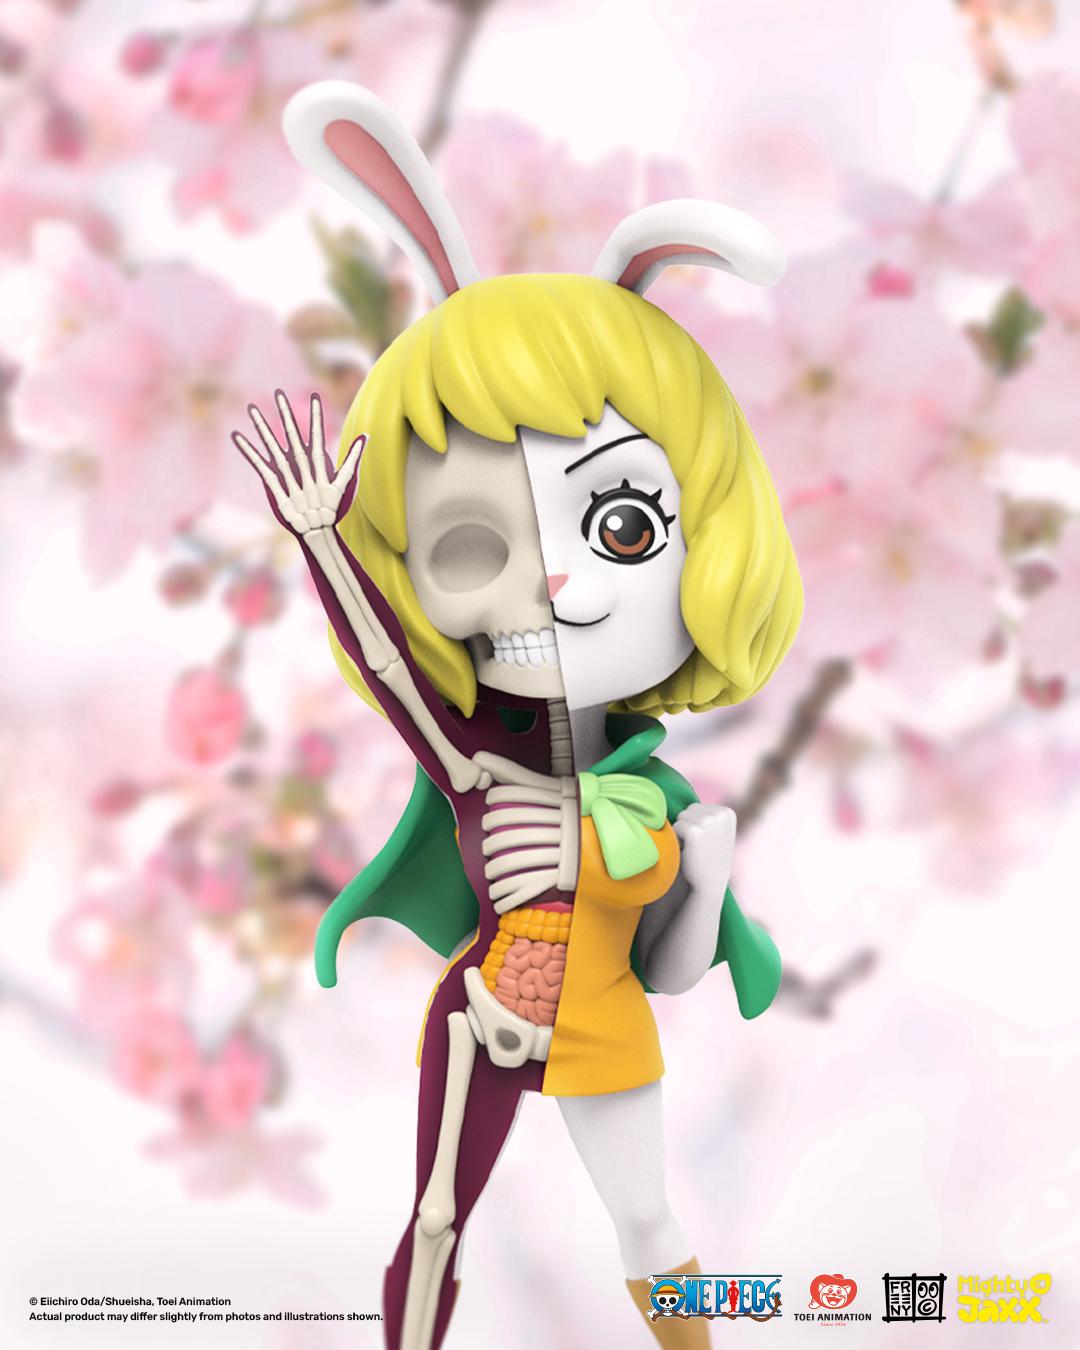 A picture containing cartoon, flower, toy, anime

Description automatically generated